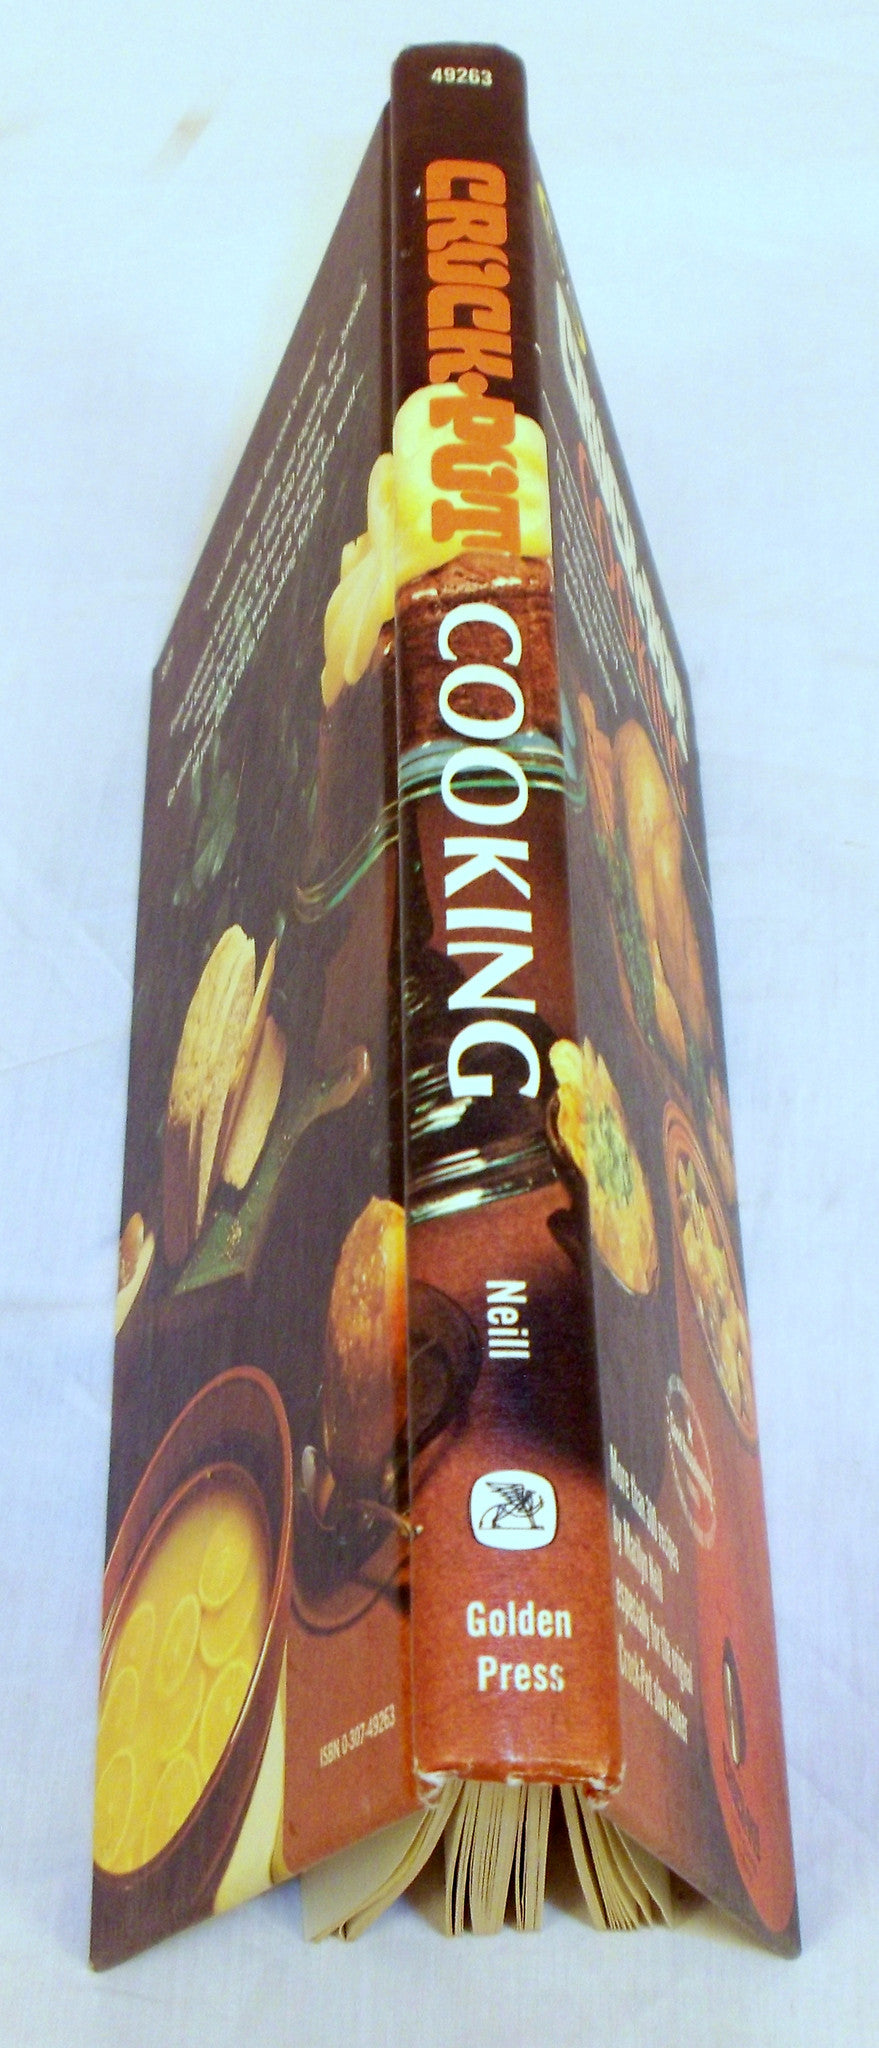 1975 Crock Pot Cooking Cook Book - Over 300 Vintage Recipes - Rival  Hardcover